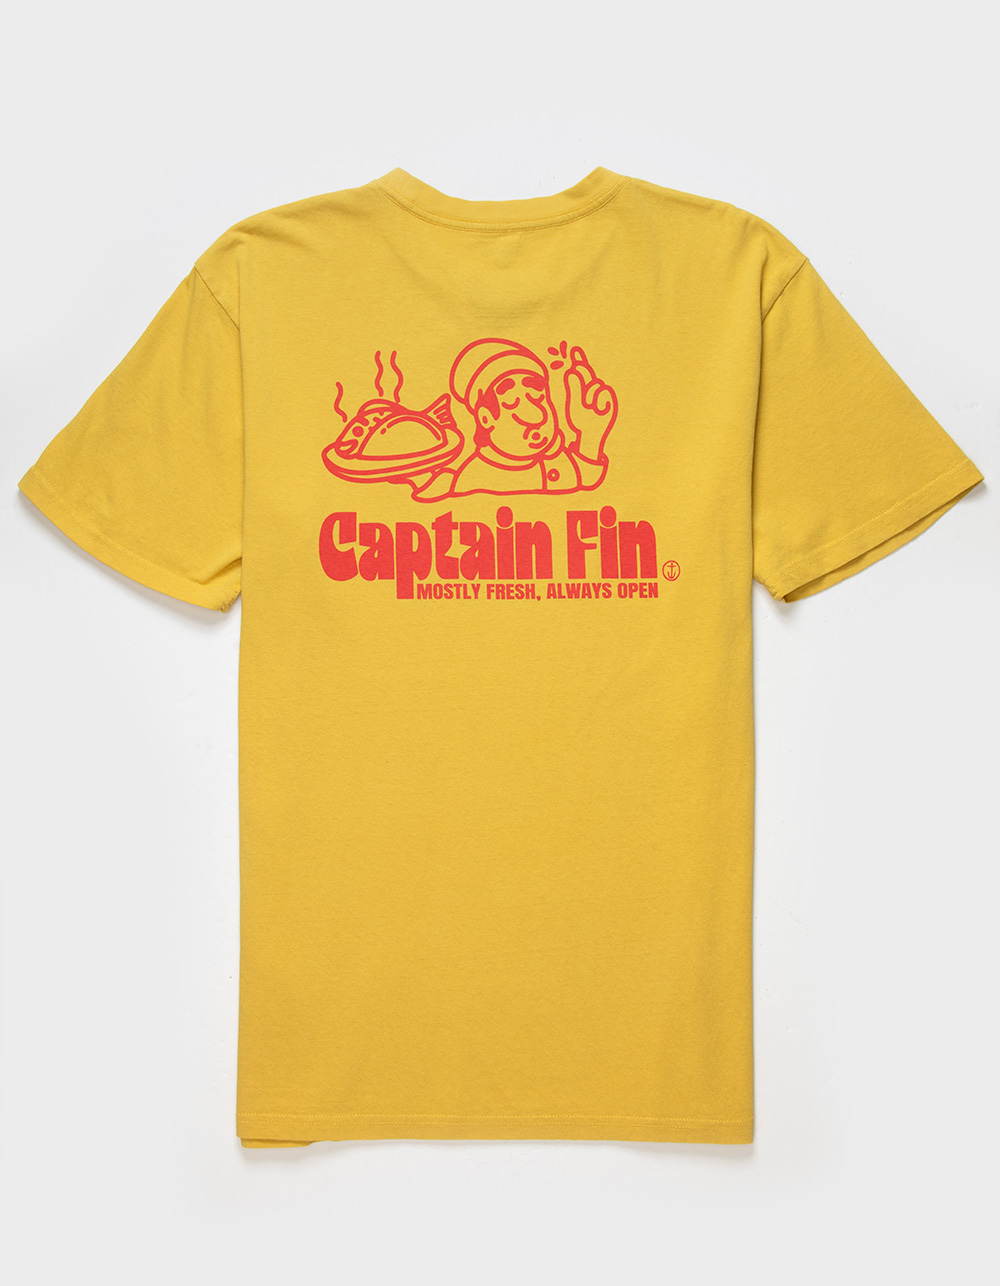 CAPTAIN FIN Mostly Fresh Mens Tee